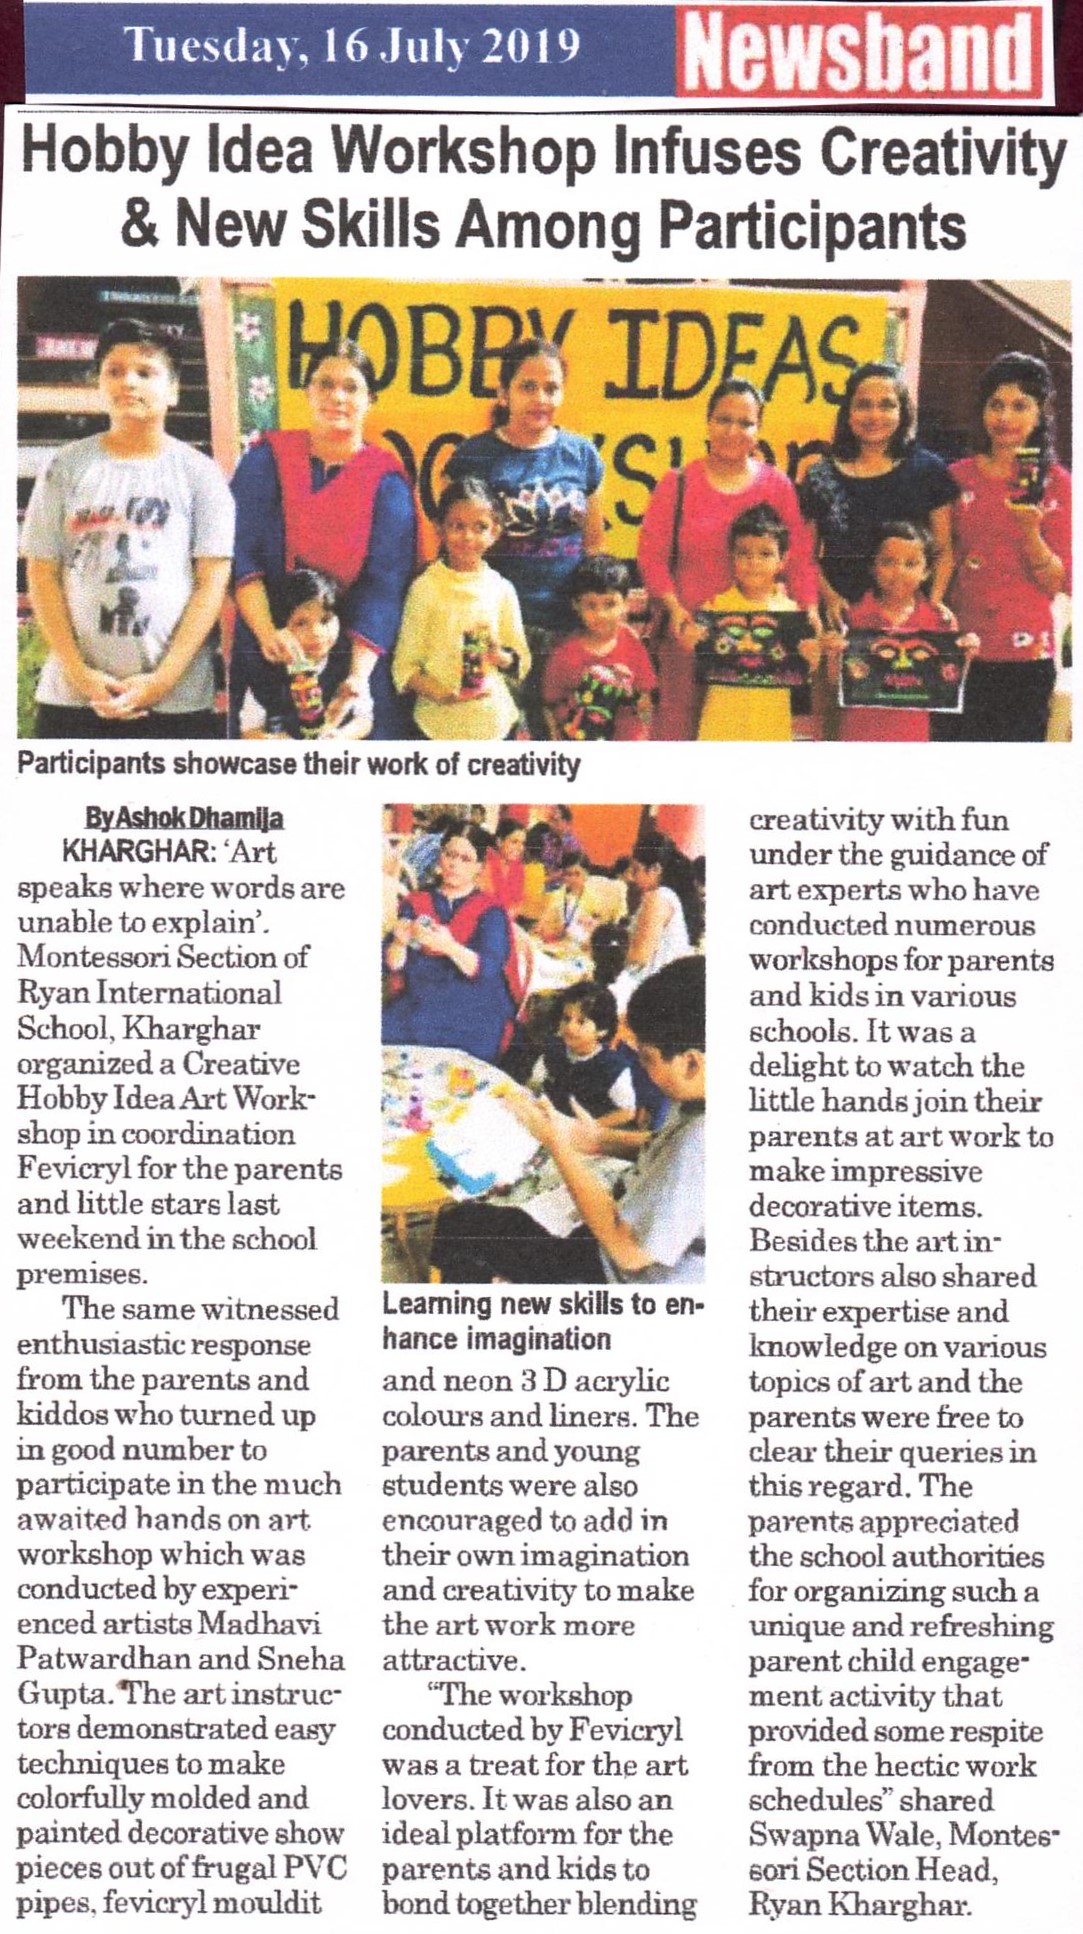 Hobby Idea Workshop Infuses Creativity &  new skills among participants was mentioned in News band - Ryan International School, Kharghar - Ryan Group